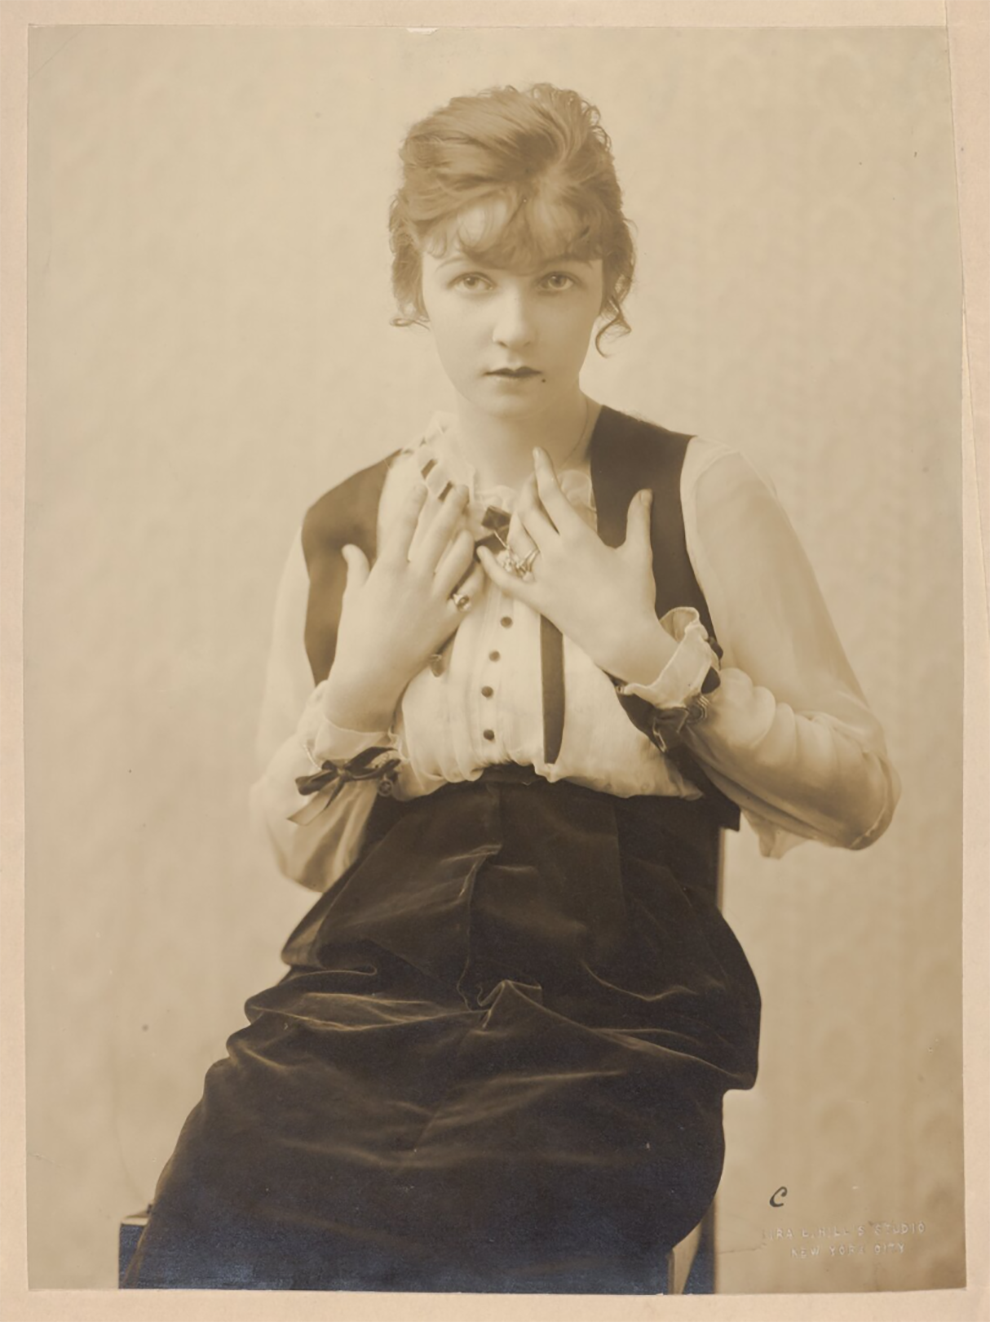 Ira L. Hill :: Irene Castle (1893 - 1969), 1910s. Other fashion photos. | src Cornell Library